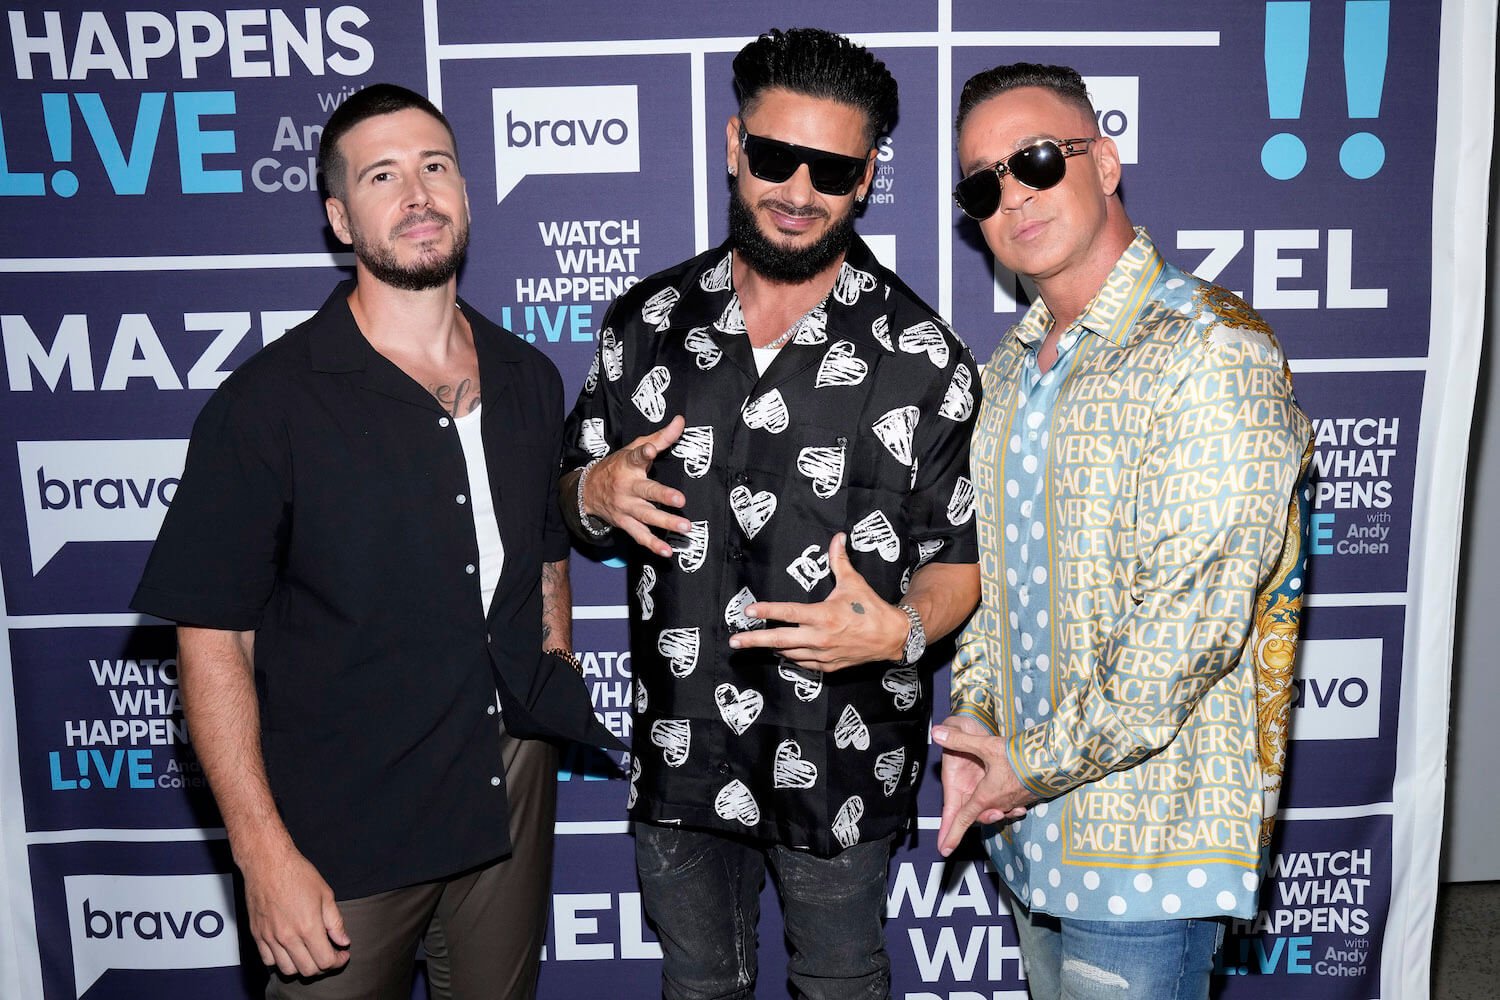 'Jersey Shore: Family Vacation' Season 7 cast member Vinny Guadagnino, Paul 'DJ Pauly D' Delvecchio, and Mike 'The Situation' Sorrentino standing next to each other